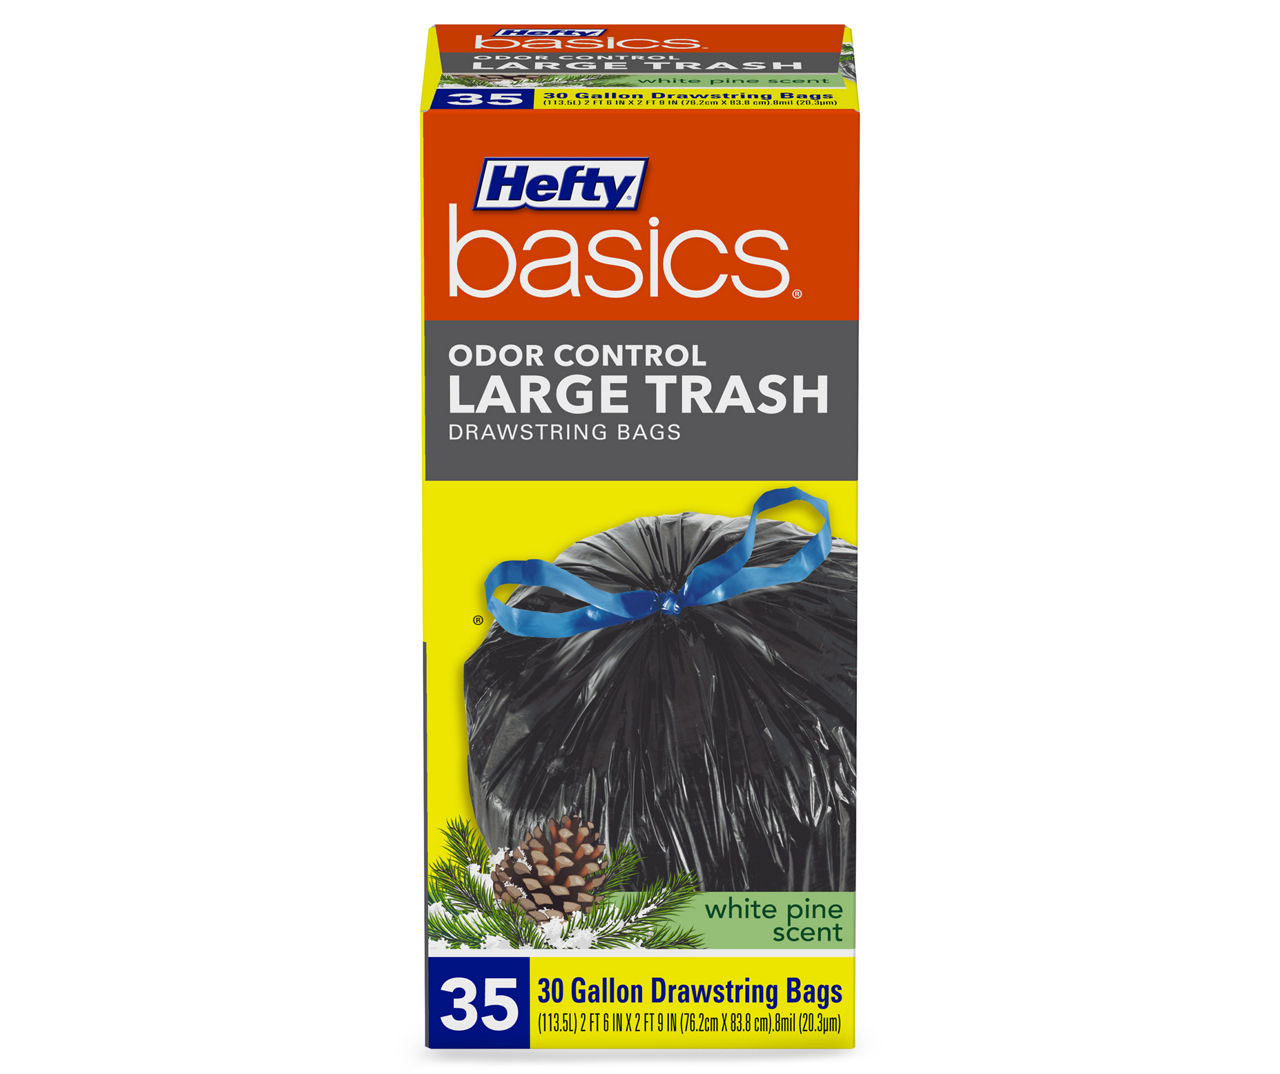 Logical Luxury Hefty Basics White Pine Scent Odor Control 30 Gallon Large  Drawstring Trash Bags - 35 ct, 30 gallon trash bags scented